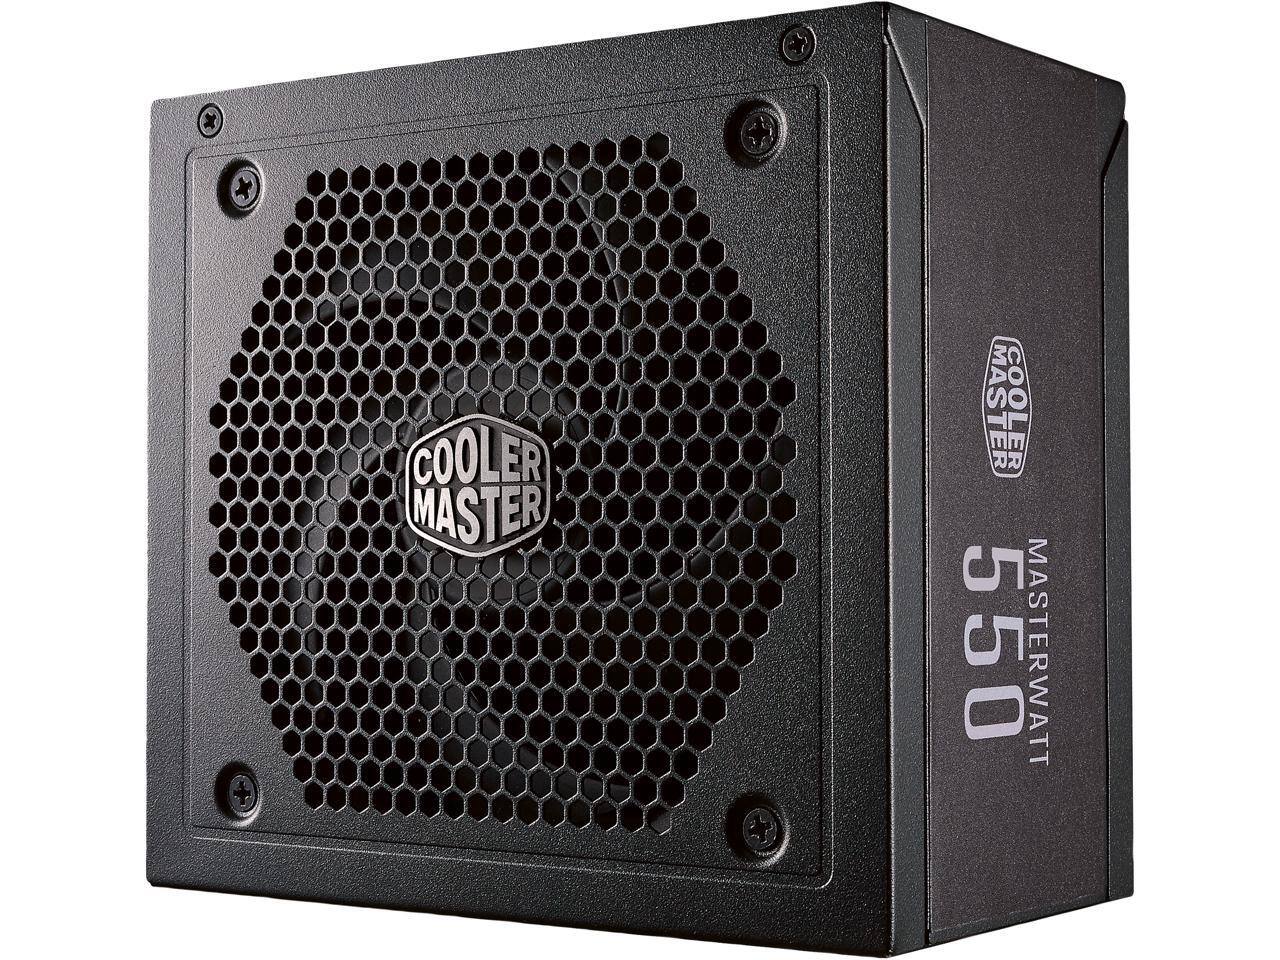 Cooler Master 550W / 650W Power Supply - $59.99 AR and More + FS